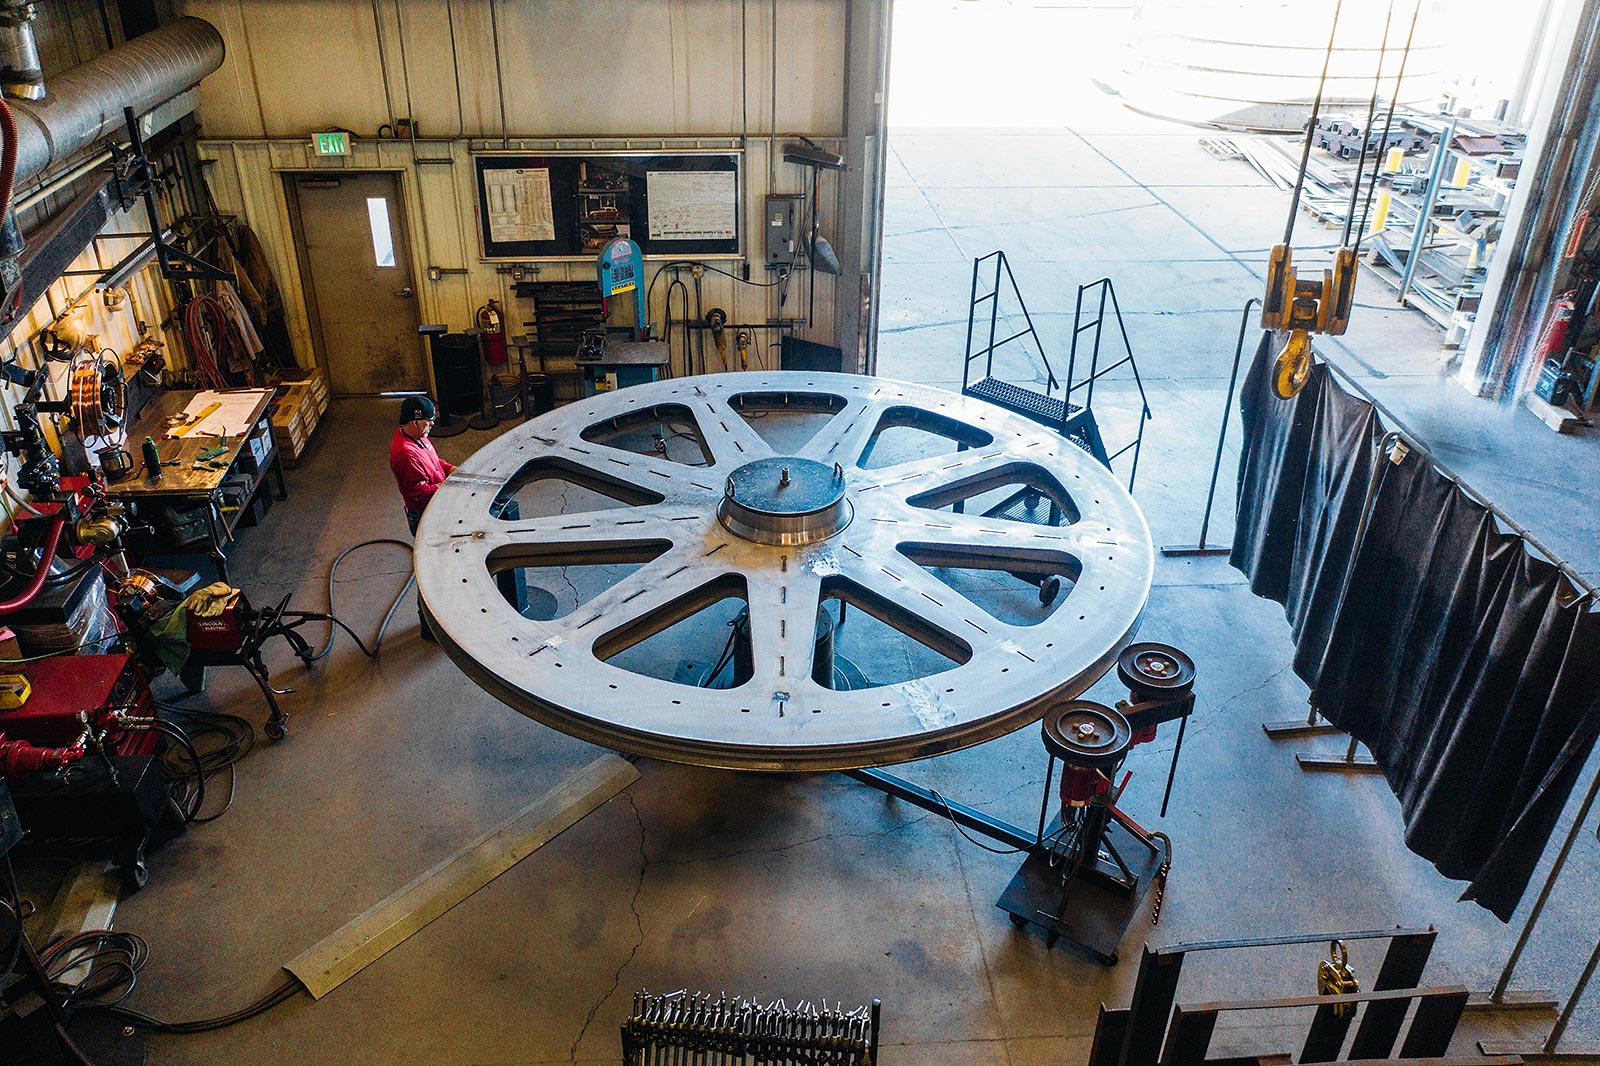 Bull wheels are hand-built and are capable of supporting 100-ton loads.